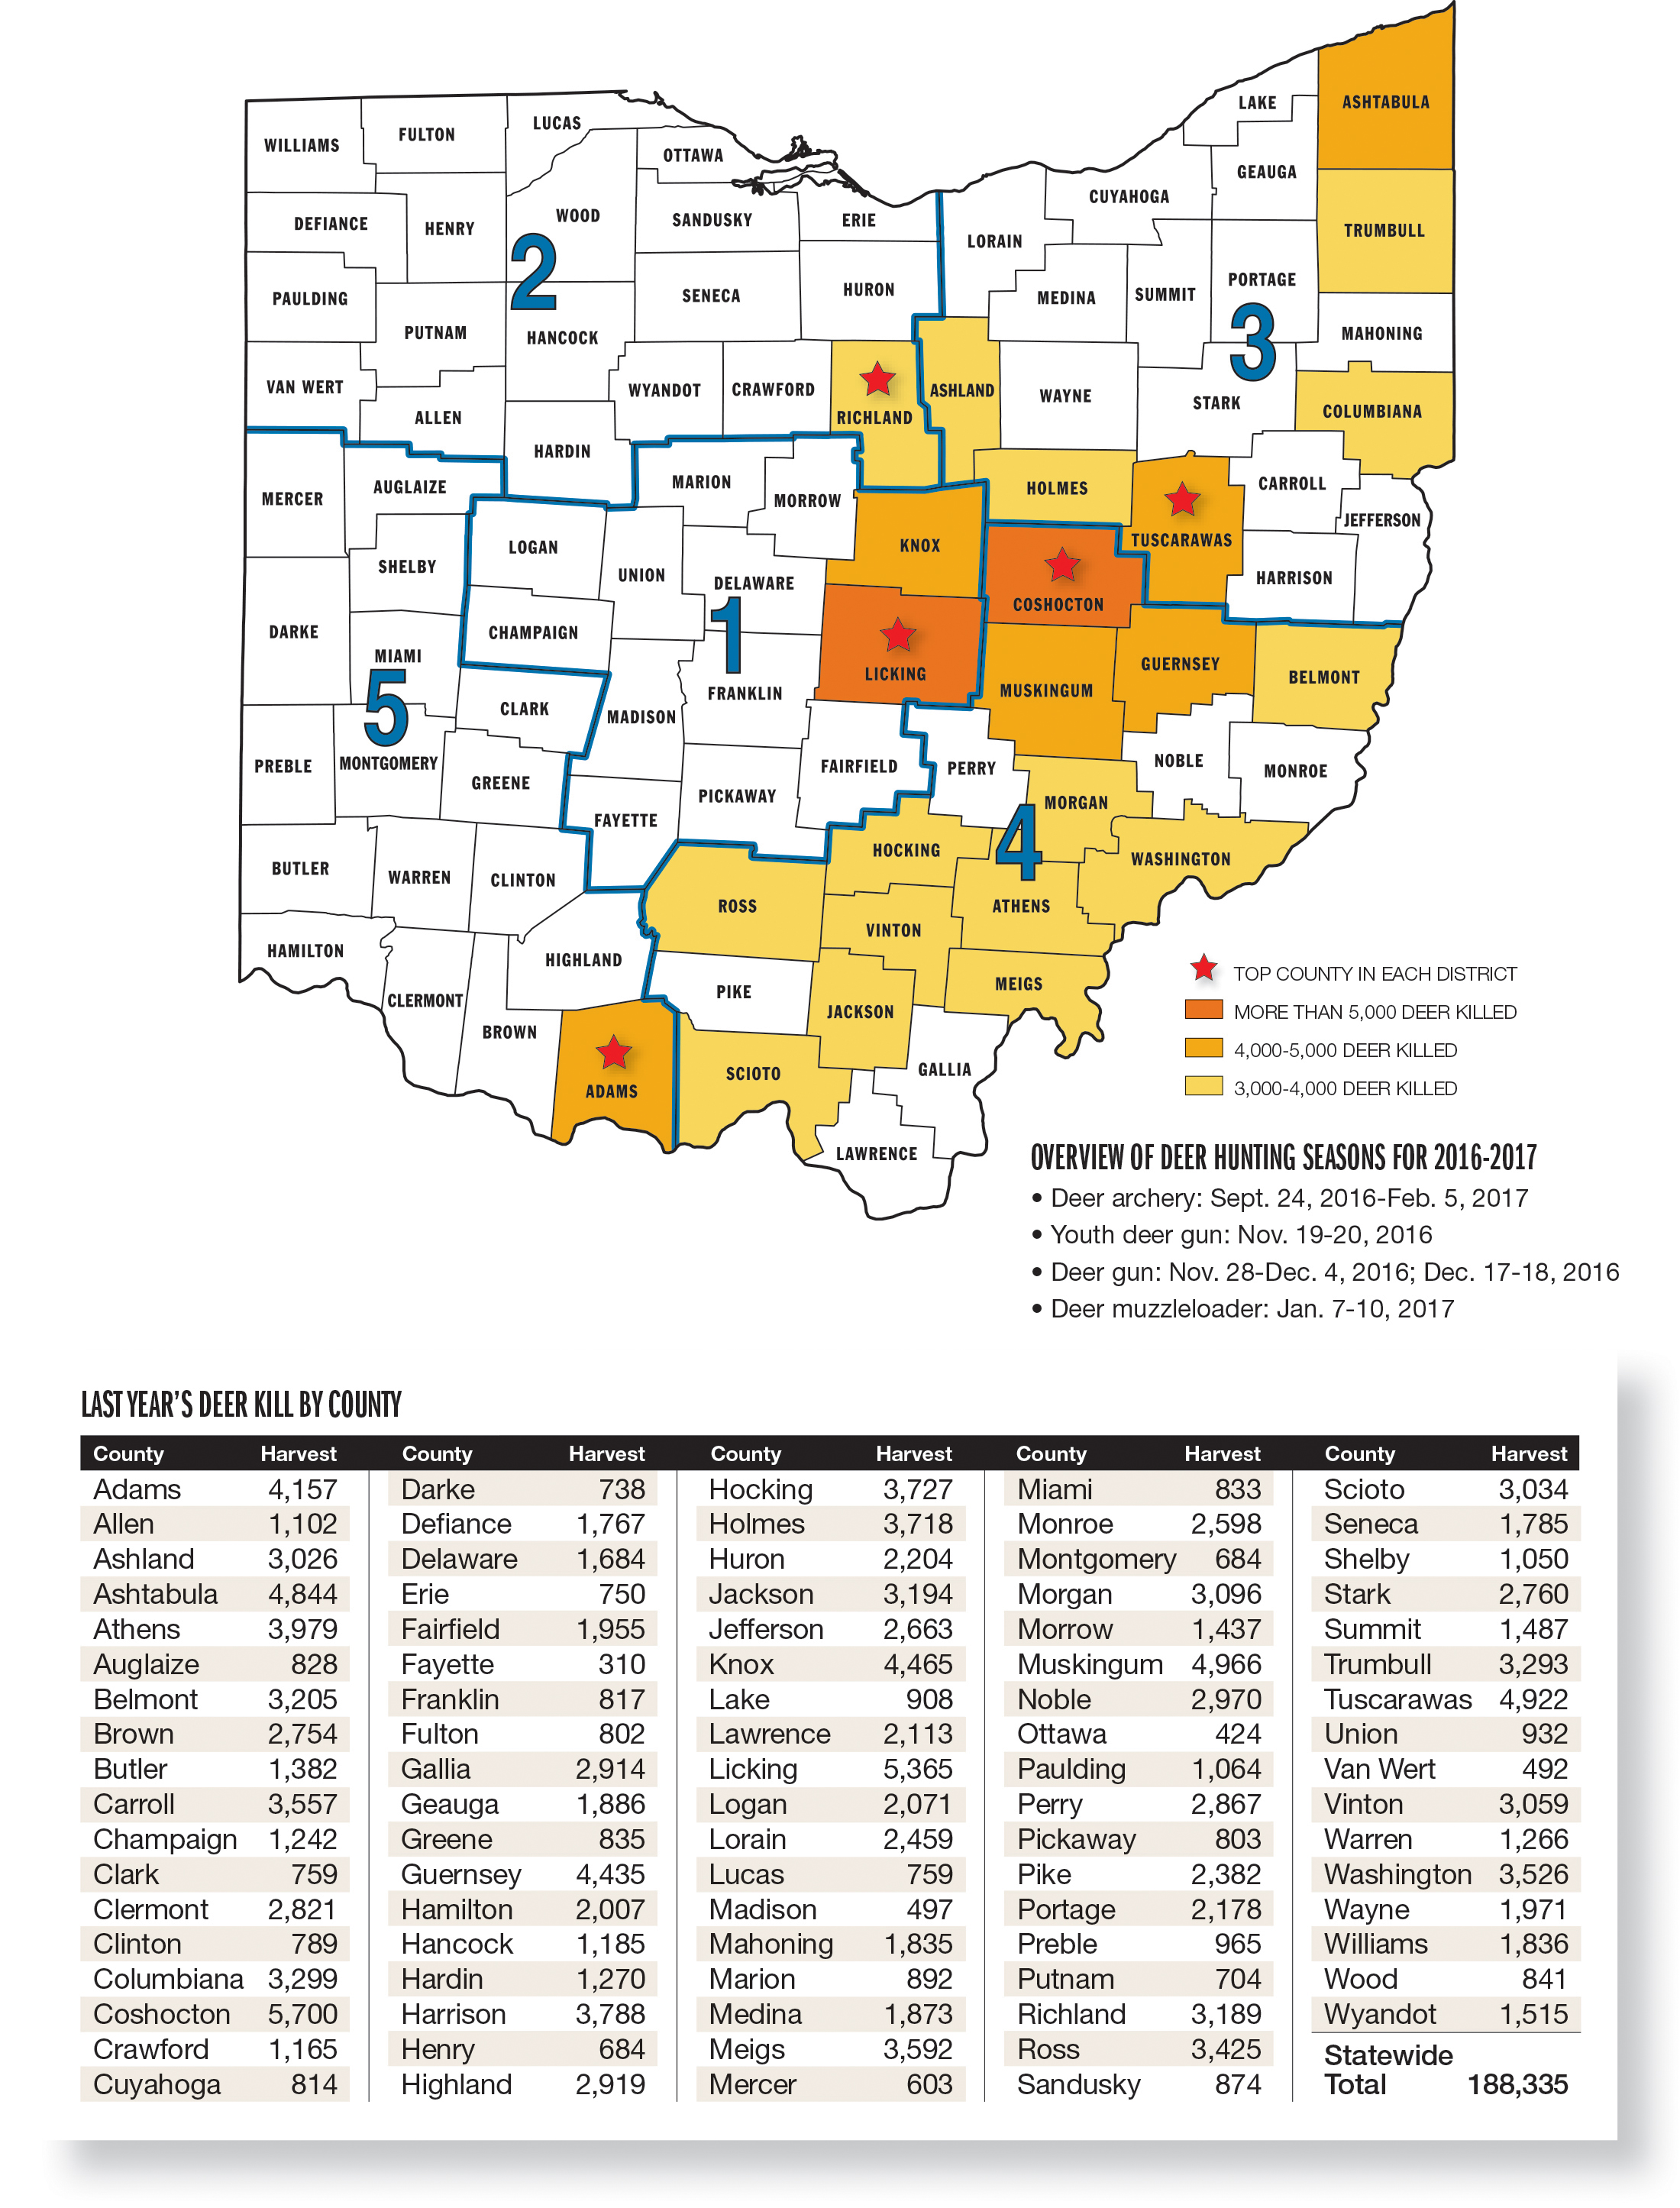 What areas are available for public hunting in Ohio?